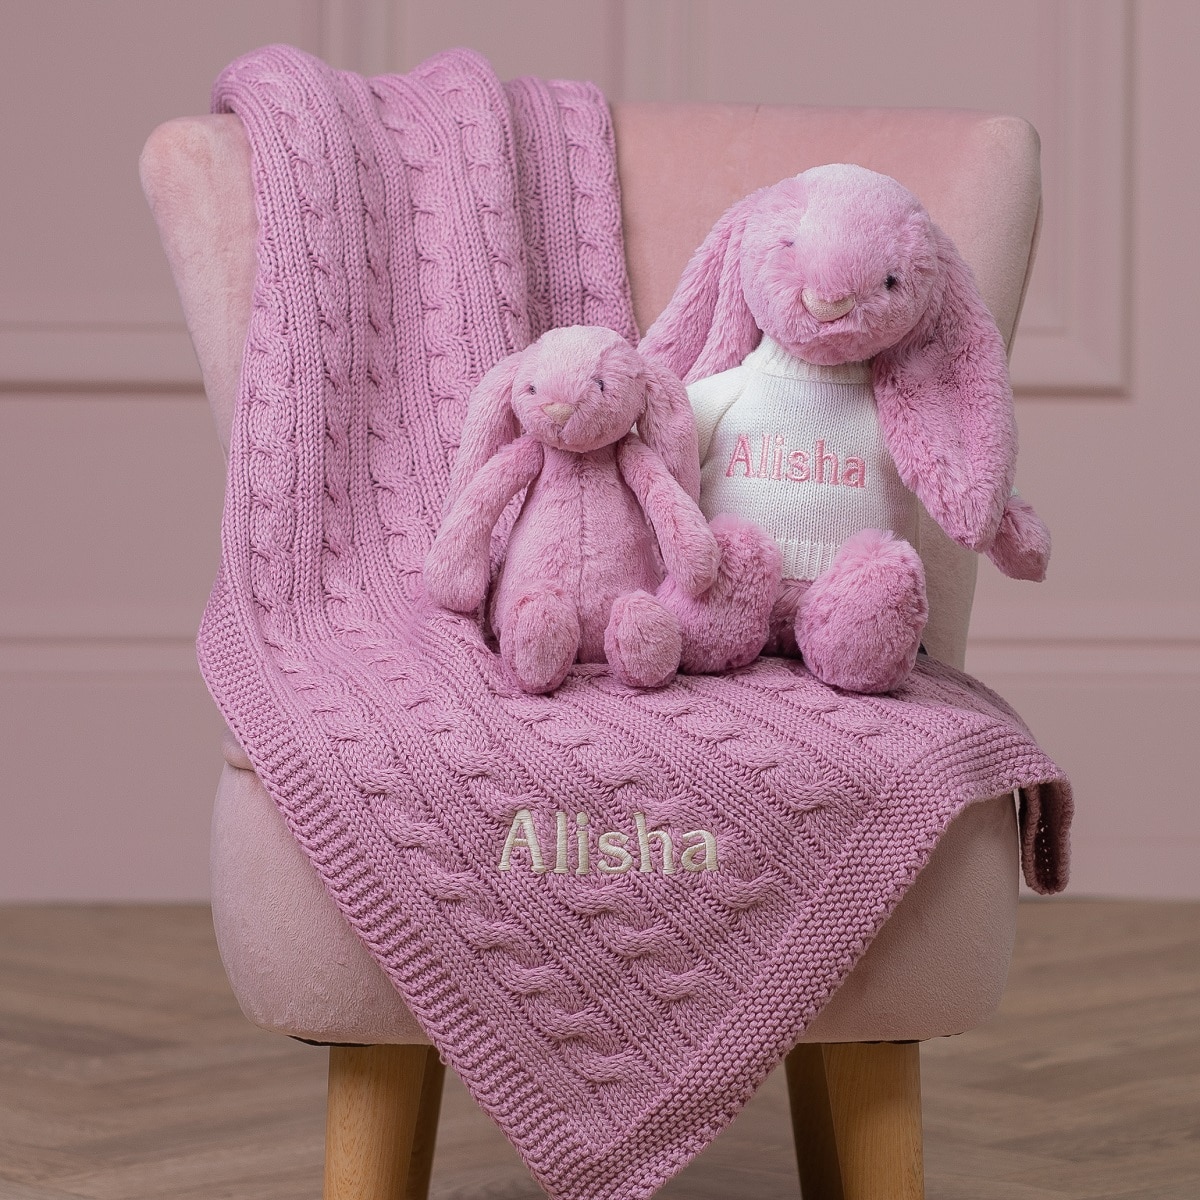 Personalised Toffee Moon luxury dawn pink cable baby blanket and tulip Jellycat bashful bunny